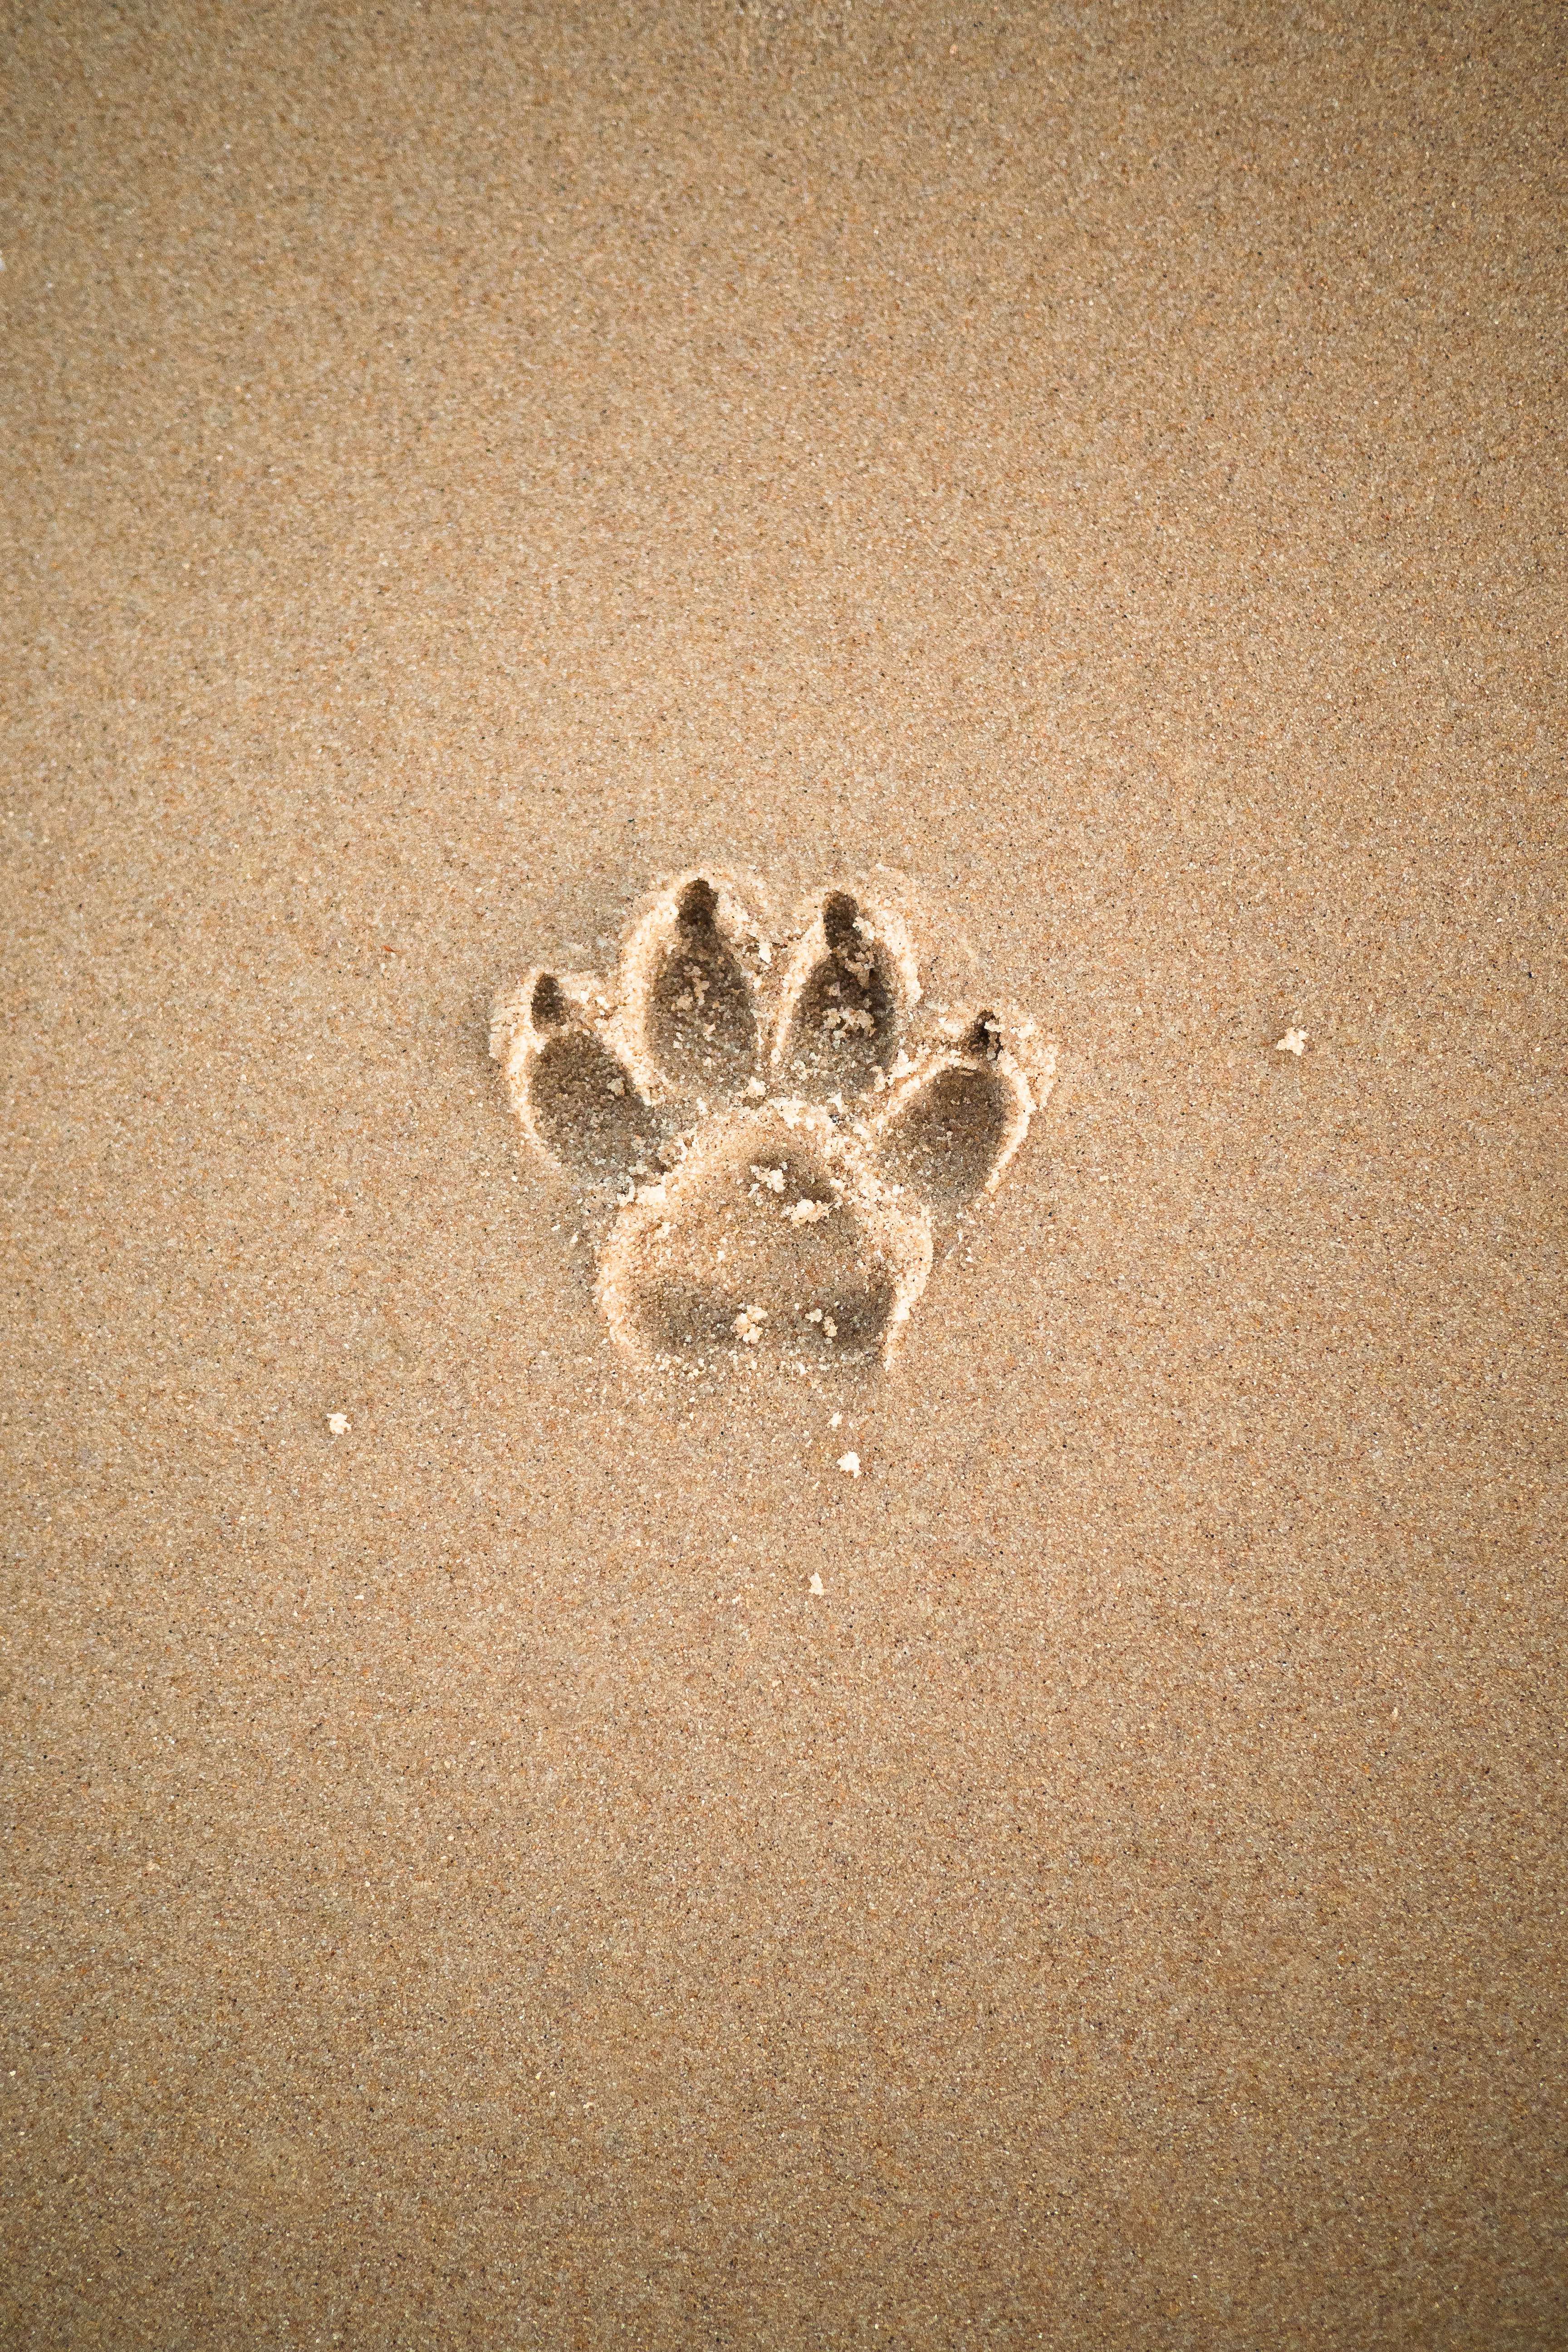 brown sand with heart shaped sand